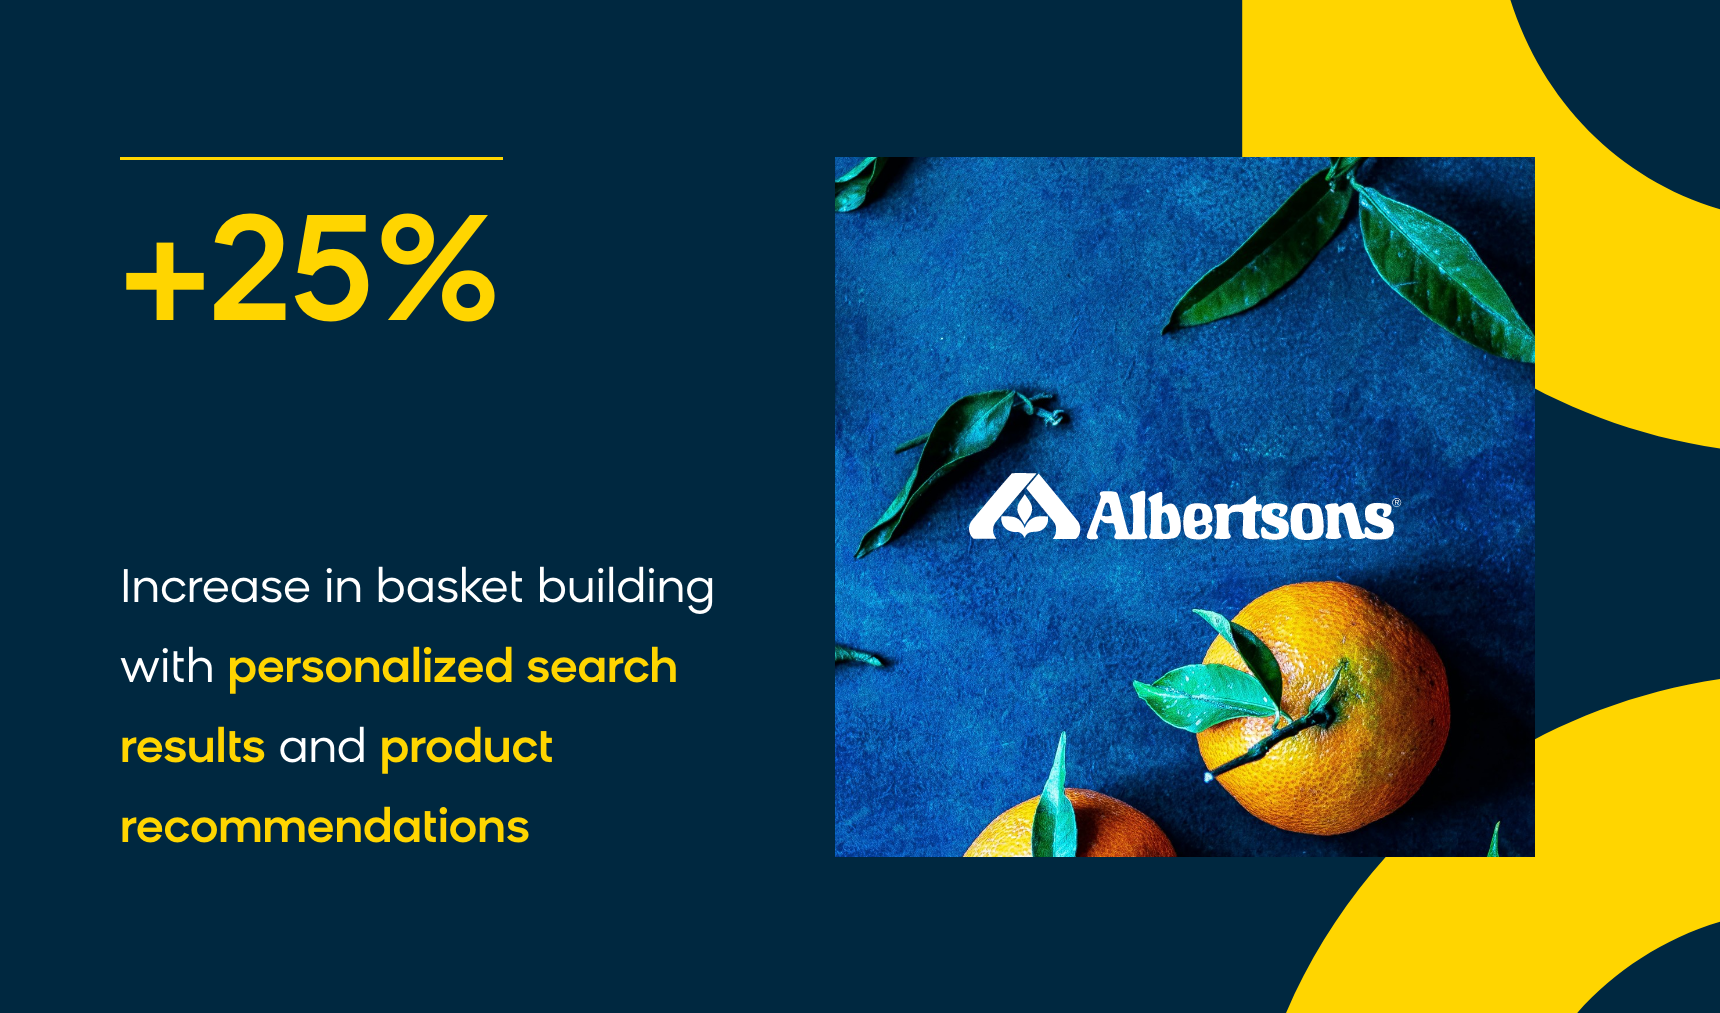 Albertsons increased basket building by 25% with personalization